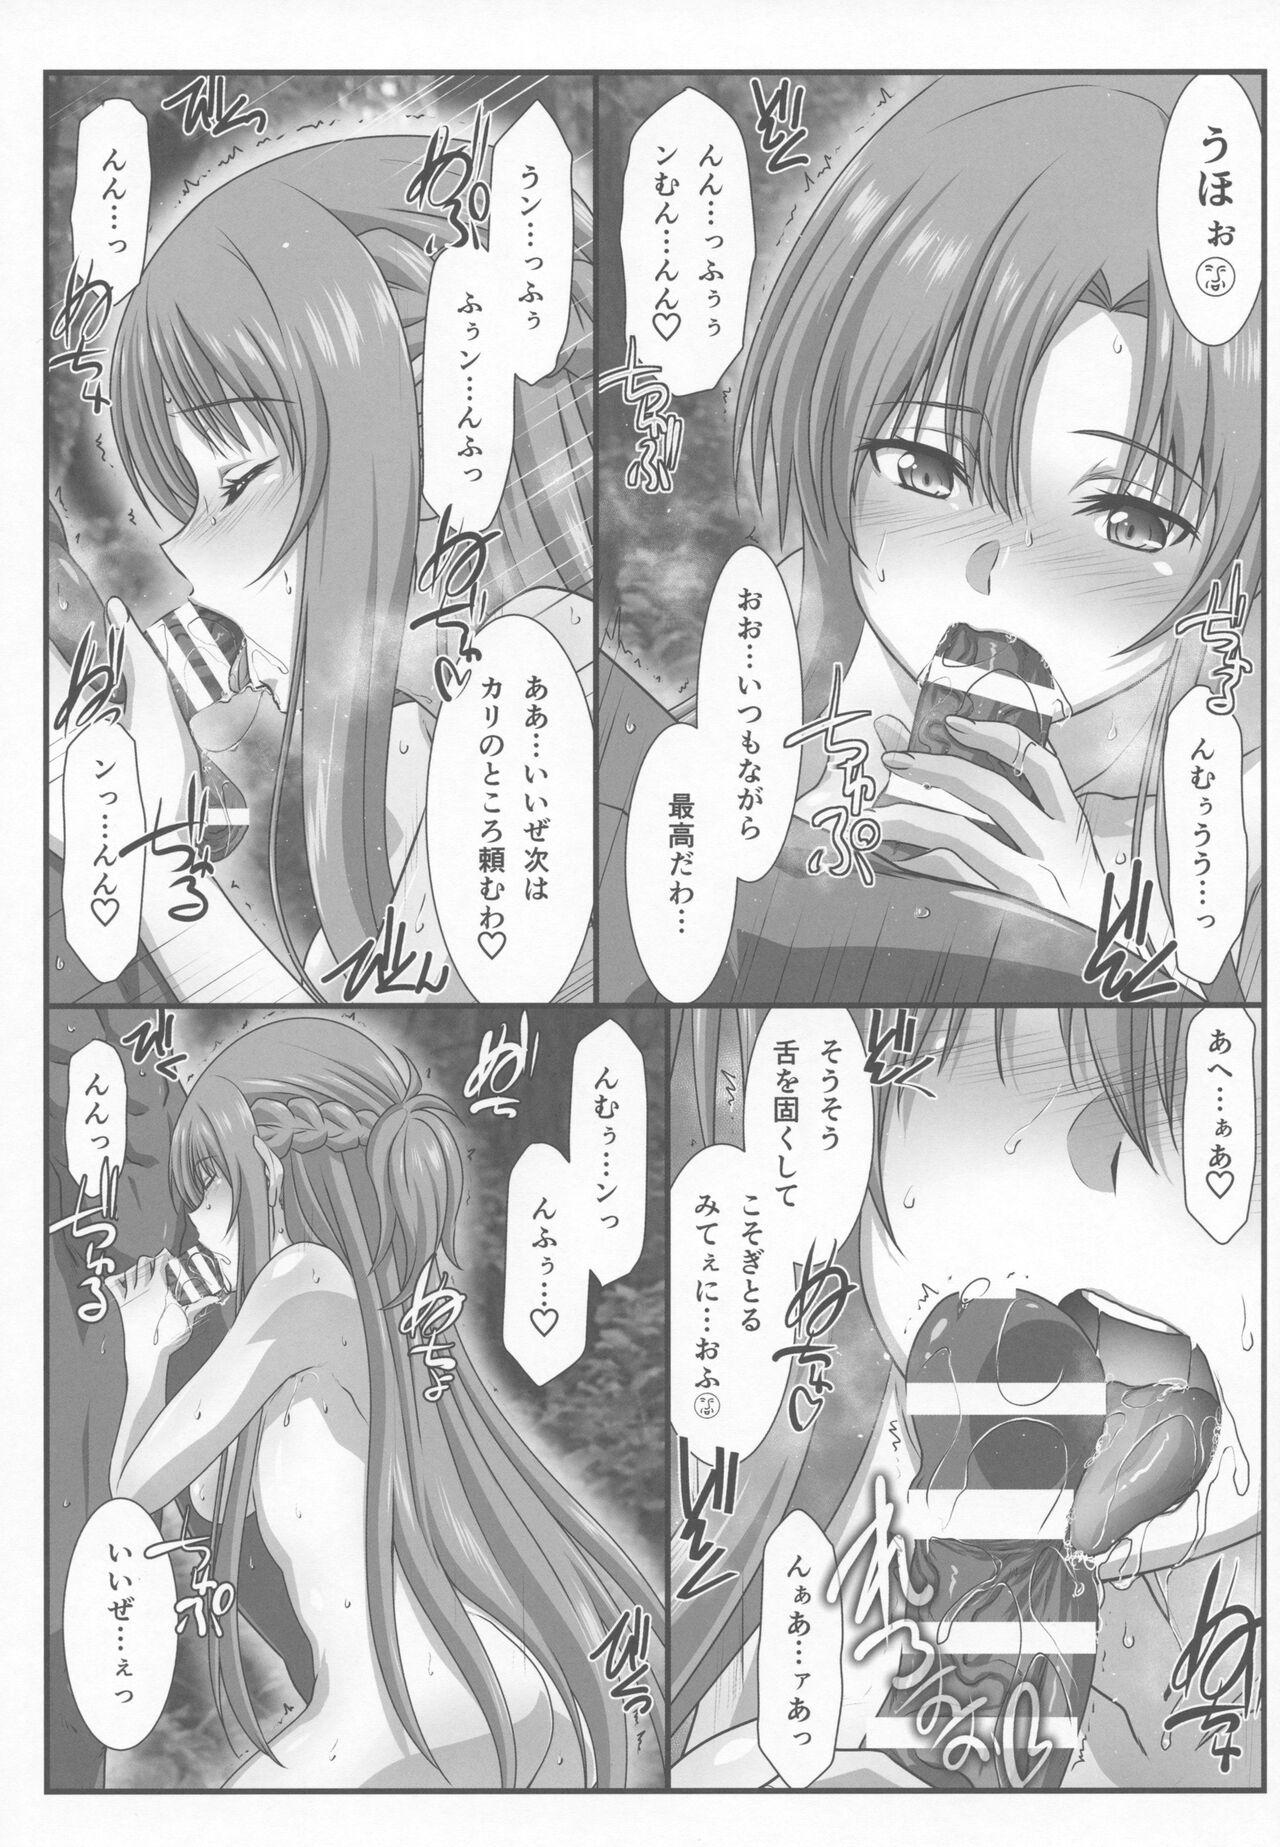 Shy Astral Bout Ver. 45 - Sword art online Blond - Page 6